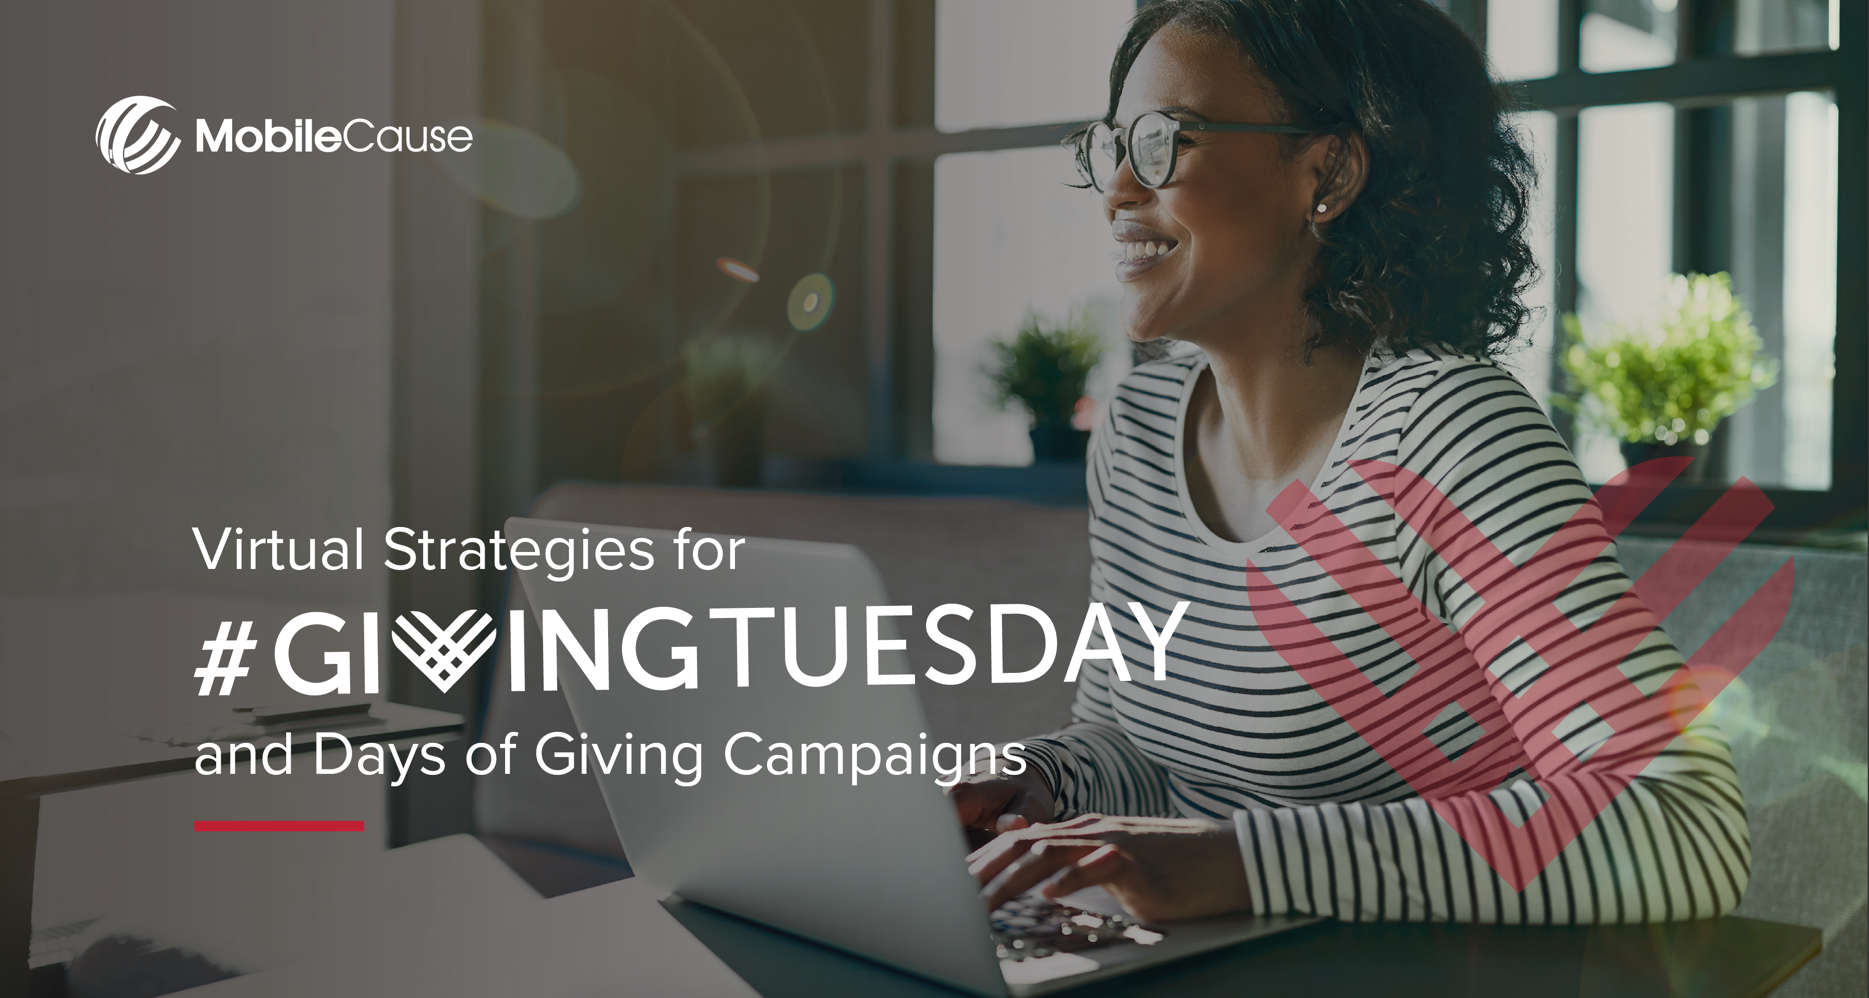 Virtual Strategies. for GivingTuesday andSays of Giving Campaigns